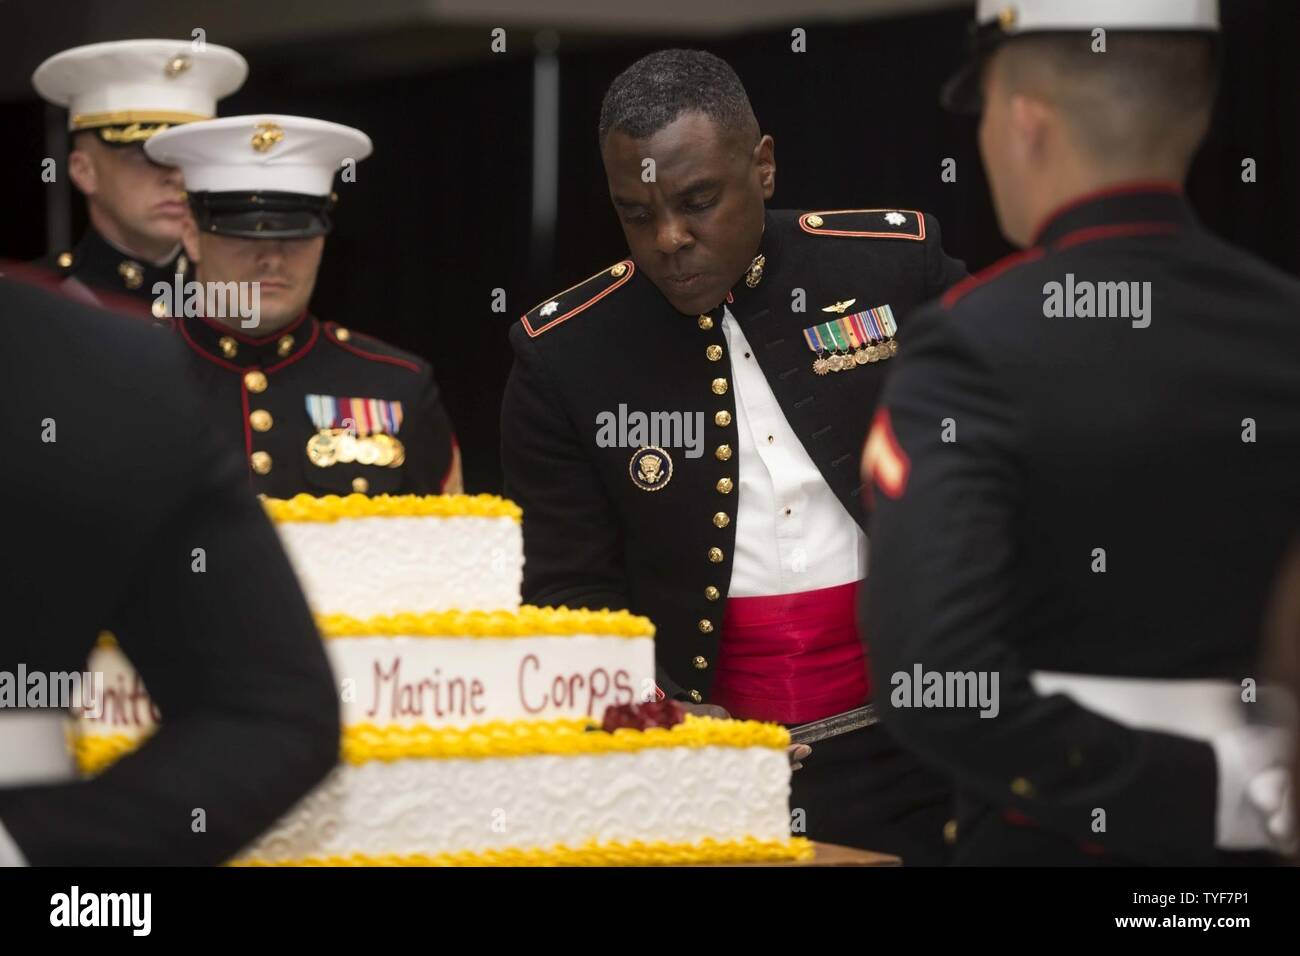 U.S. Marine Corps Lt. Col., Quentin Vaughn, commanding officer, Headquarters and Headquarters Squadron (H&HS), cuts the traditional  birthday cake during the H&HS Marine Corps Air Station New River 241st Marine Corps Birthday Ball at the Crystal Coast Civic Center, Morehead City, N.C., Nov. 5, 2016. The Marine Corps has carried 241 years of traditions, values and standards since its establishment in 1775. Stock Photo